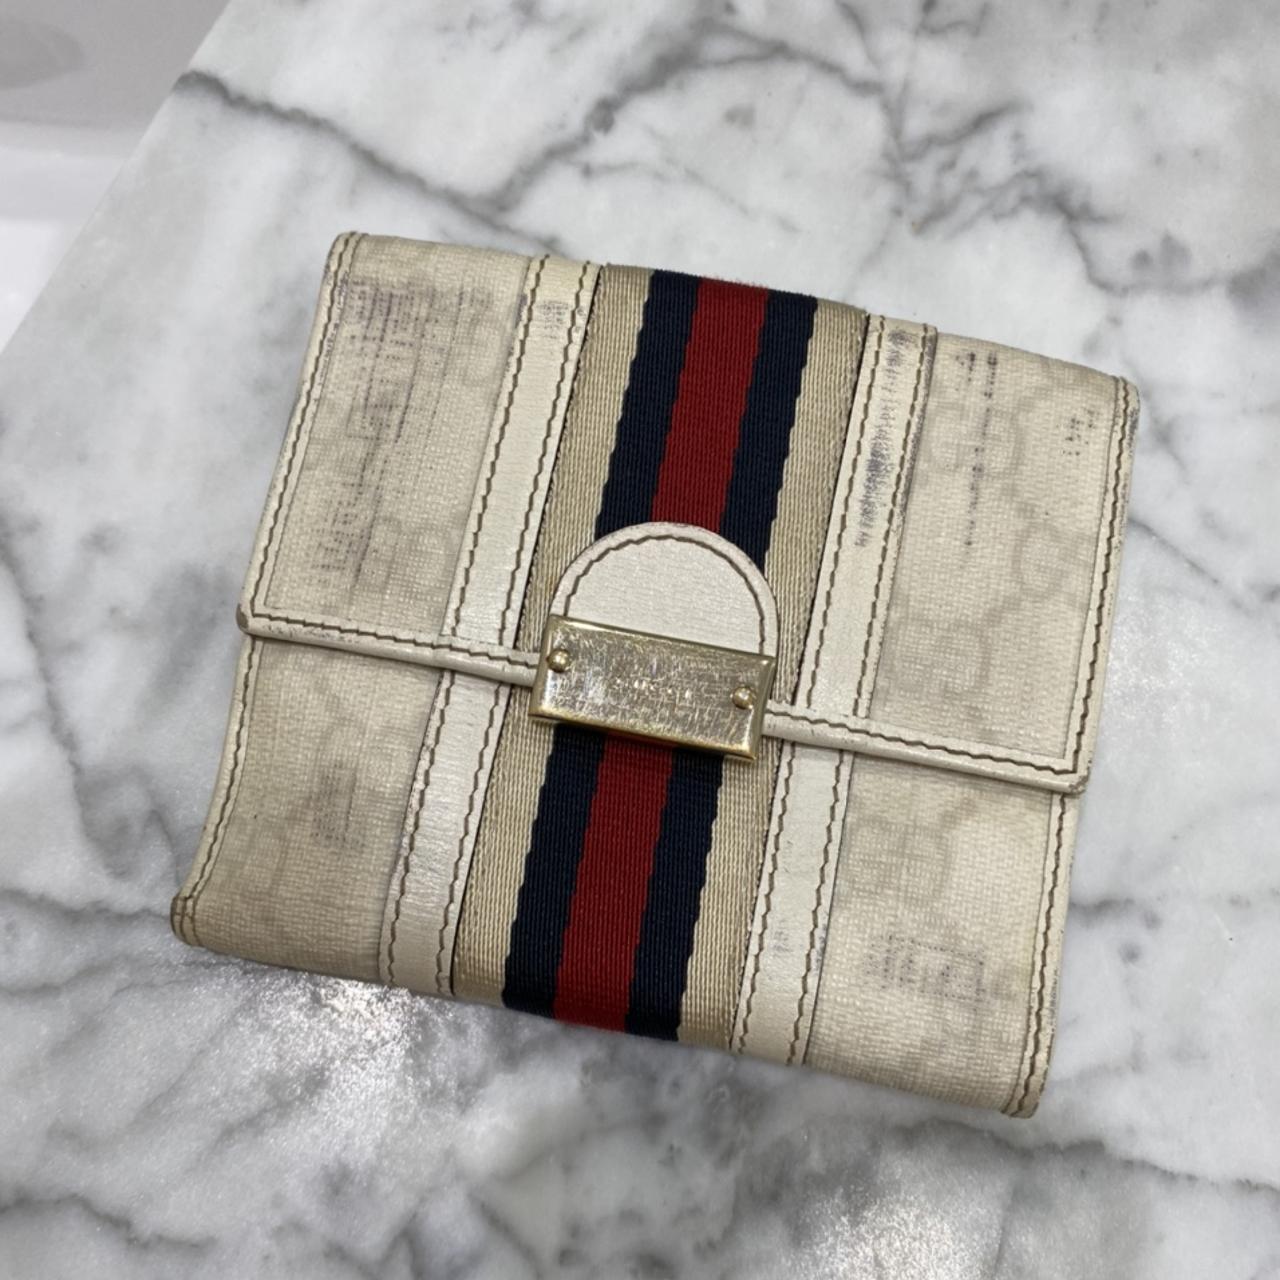 100% AUTHENTIC GUCCI WALLET WITH LEATHER DETAILS AND - Depop